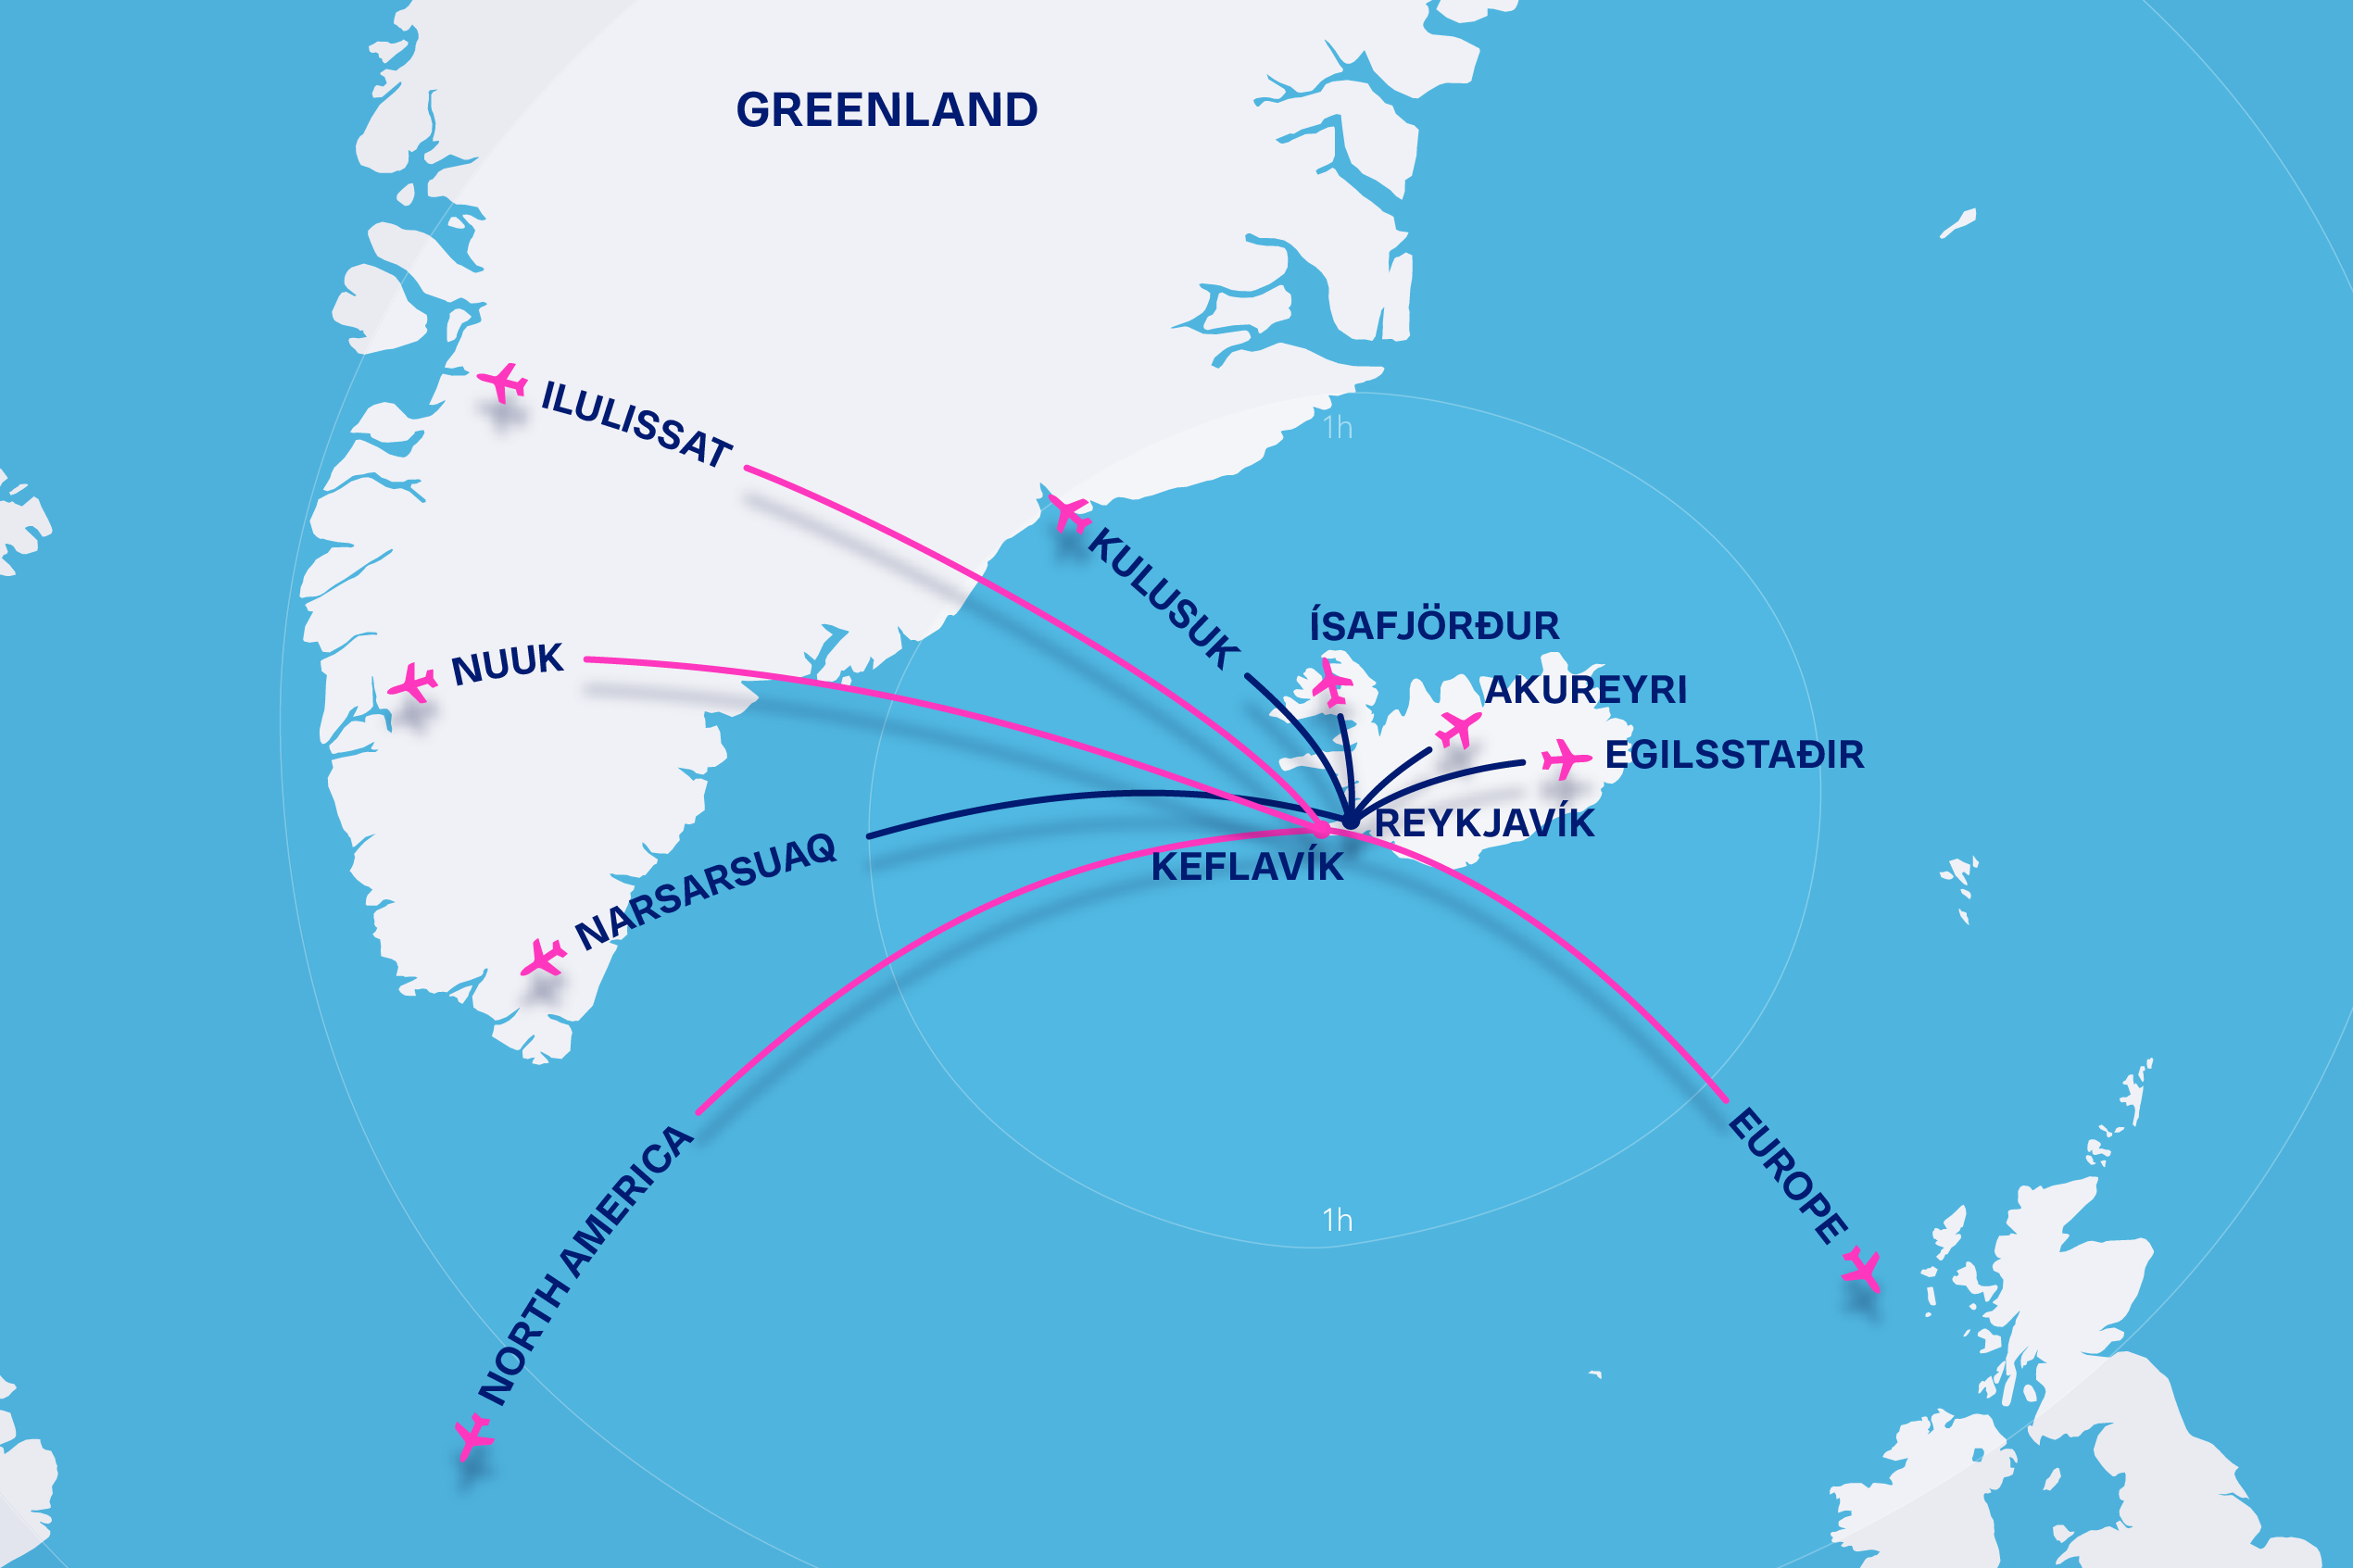 22-2220-Greenland-route-map-v02.jpg